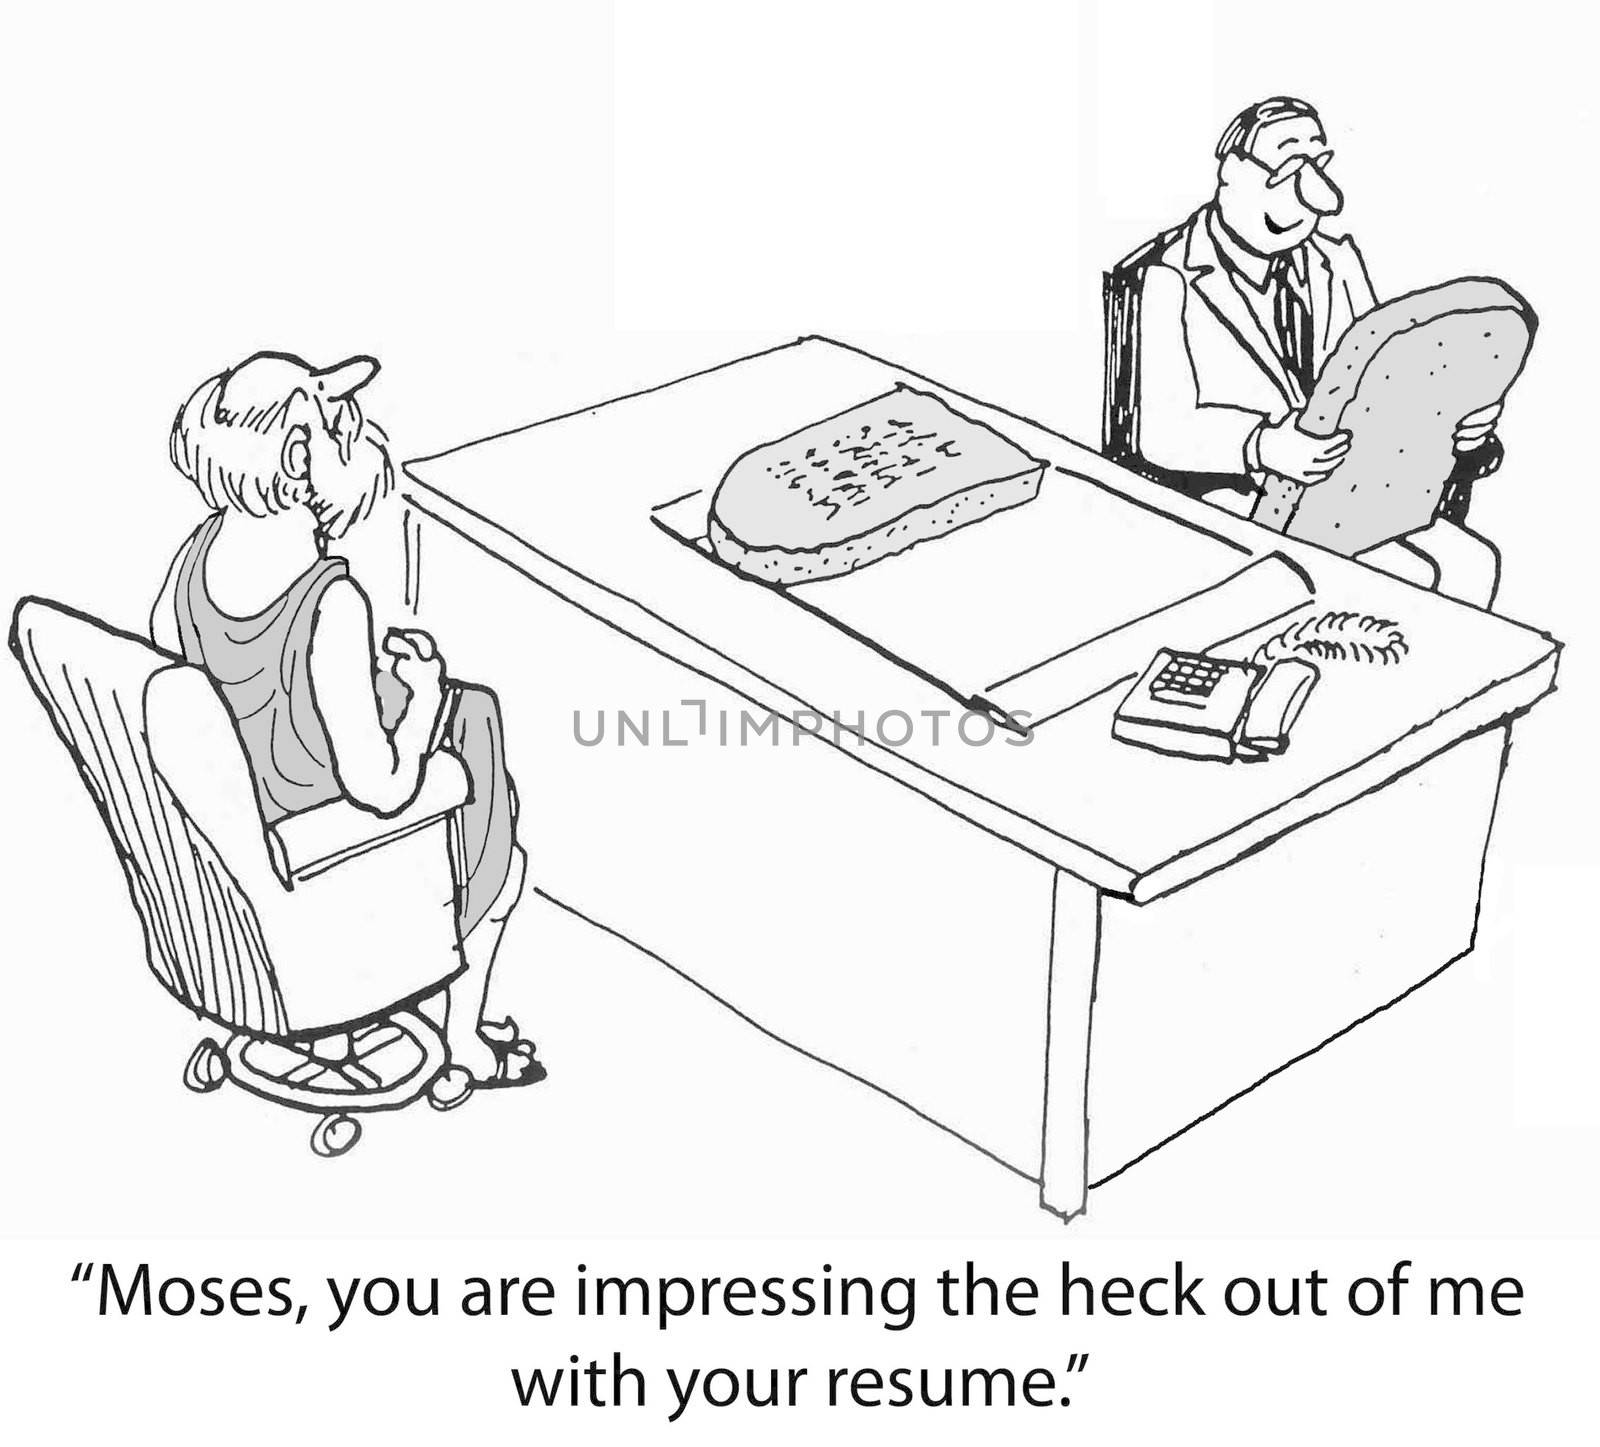 "Moses, you are impressing the heck out of me with your resume."